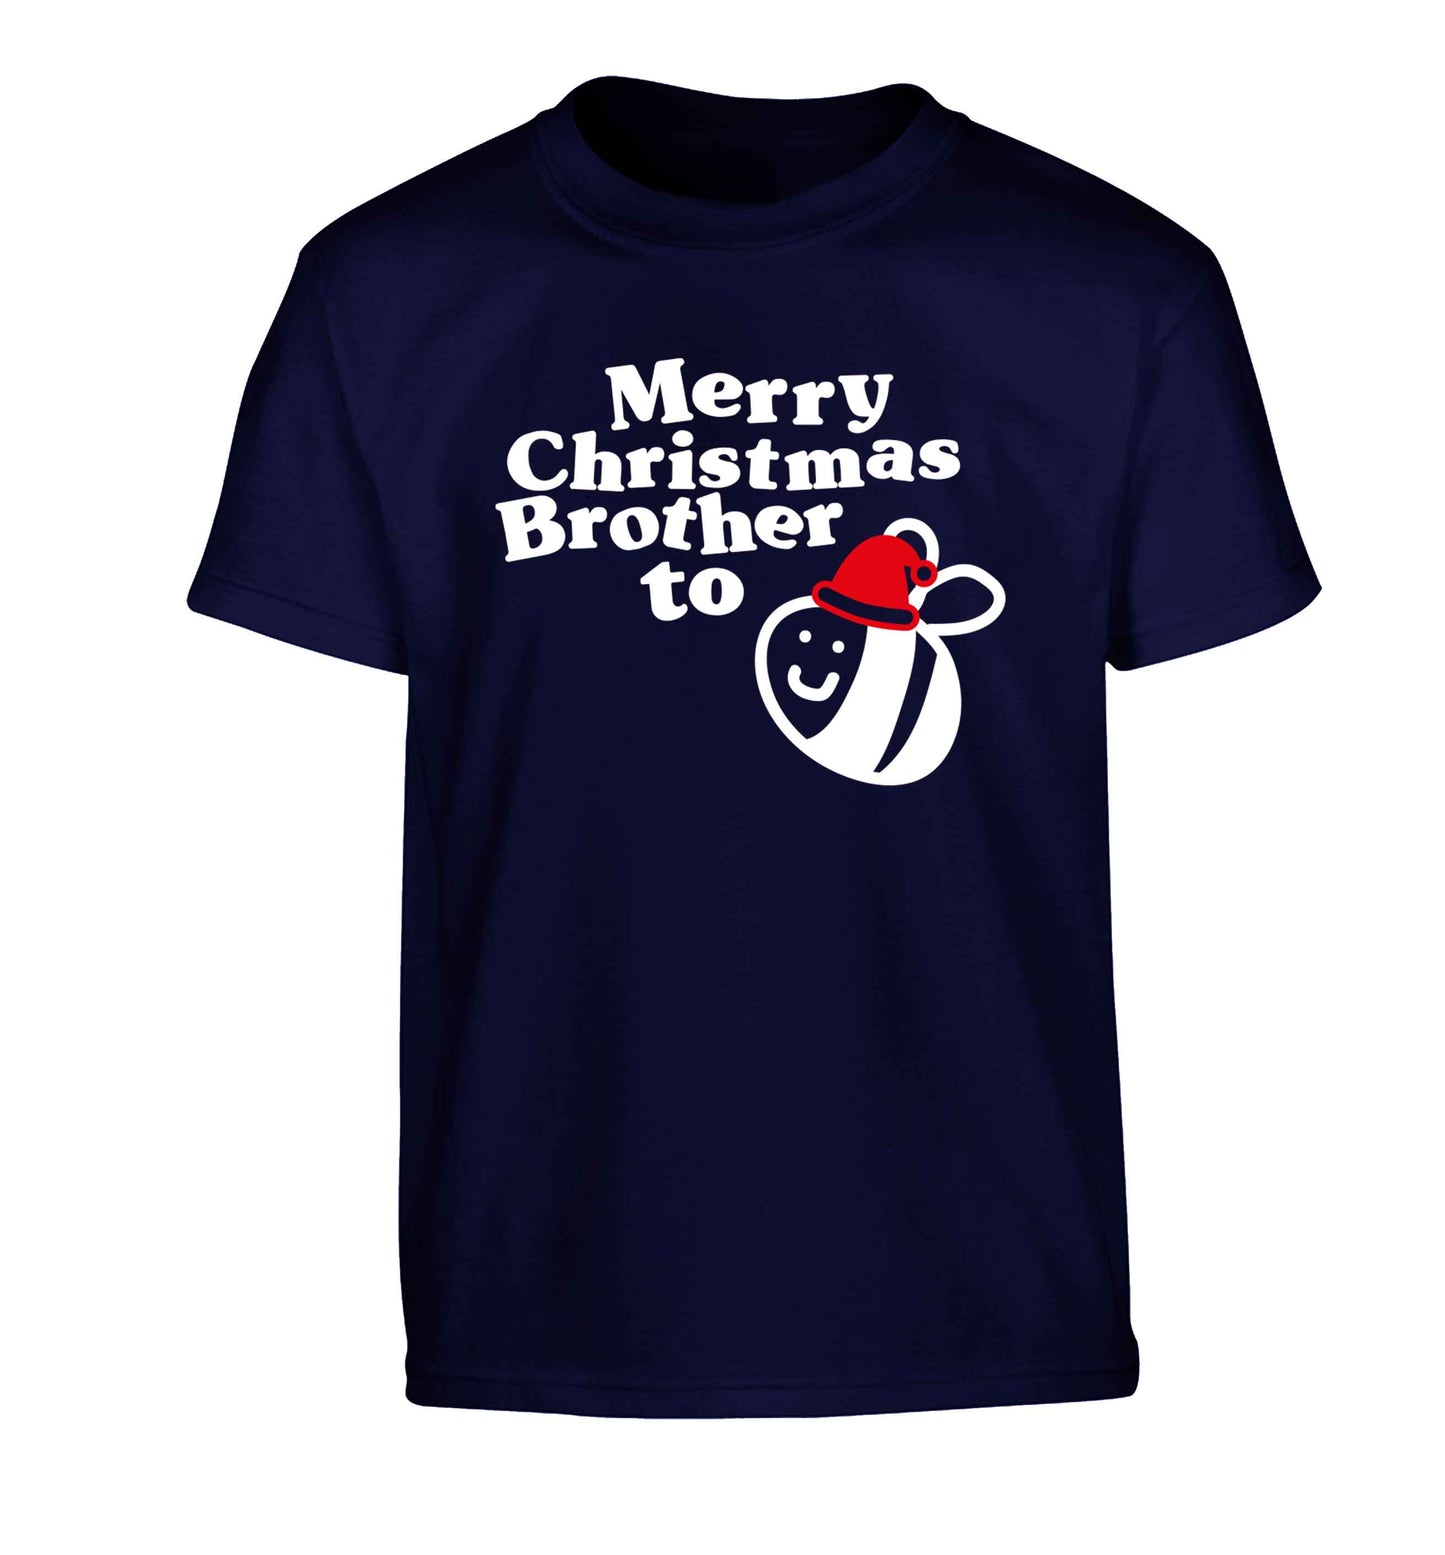 Merry Christmas brother to be Children's navy Tshirt 12-13 Years